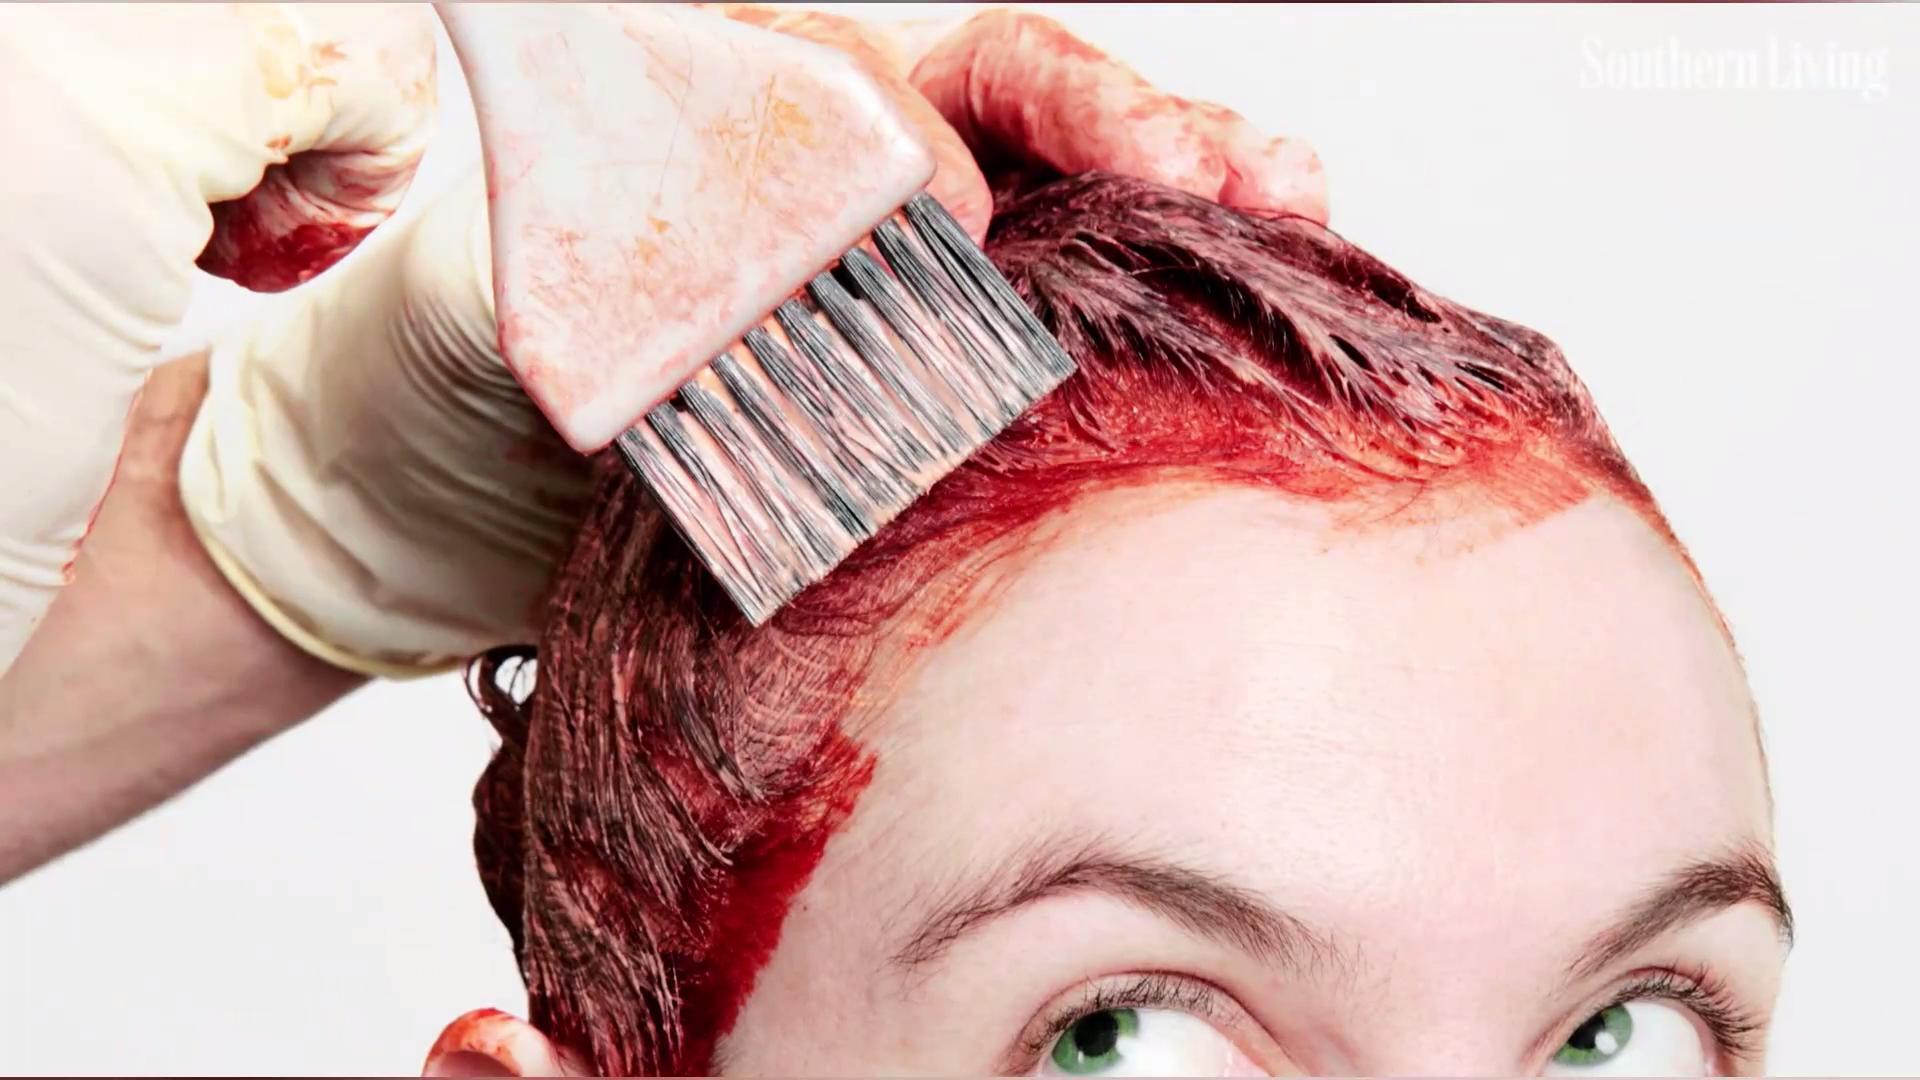 Get Hair Dye off Skin Quickly and Safely